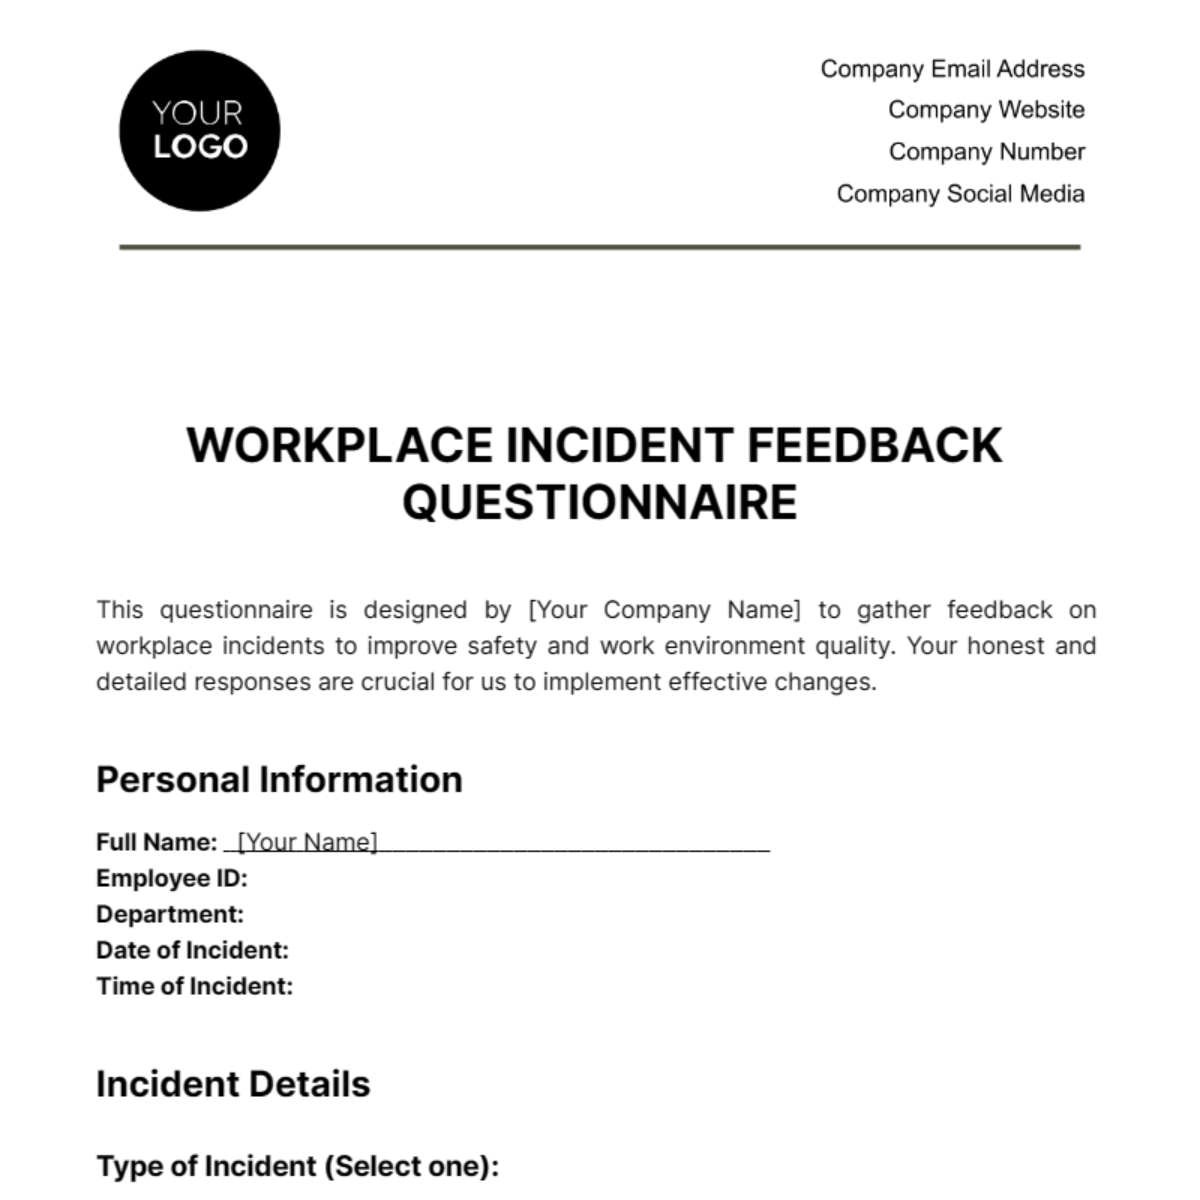 Workplace Incident Feedback Questionnaire Template